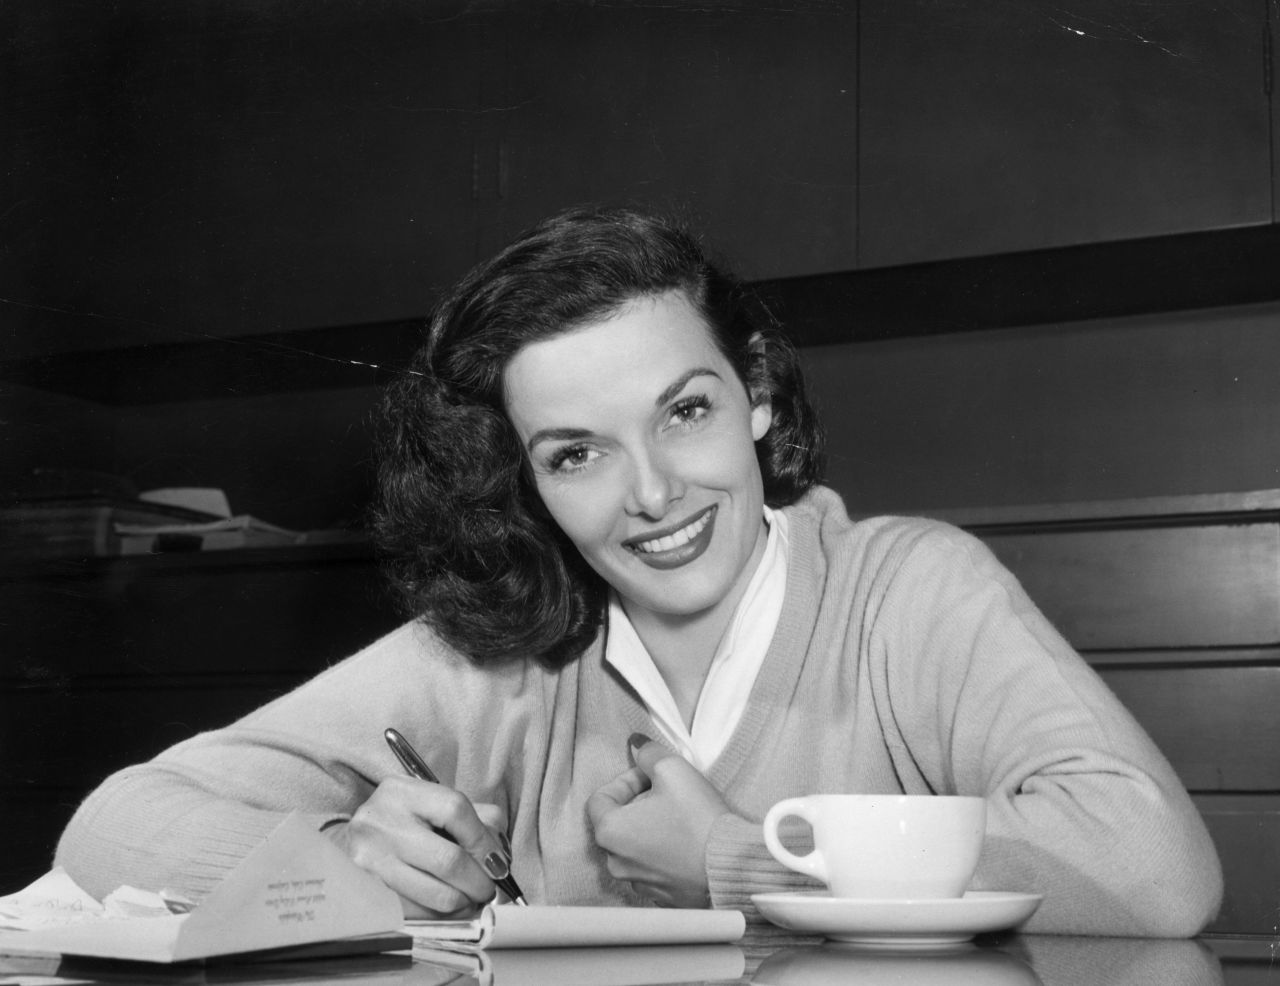 Jane Russell, a voluptuous star of the 1940s and 1950s, died February 28 of respiratory difficulties. She was 89. Russell was best known for her role in "Gentlemen Prefer Blondes" alongside Marilyn Monroe. <a href="http://articles.cnn.com/2011-02-28/entertainment/russell.obit_1_silver-screen-film-appearance?_s=PM:SHOWBIZ">Full story</a> 